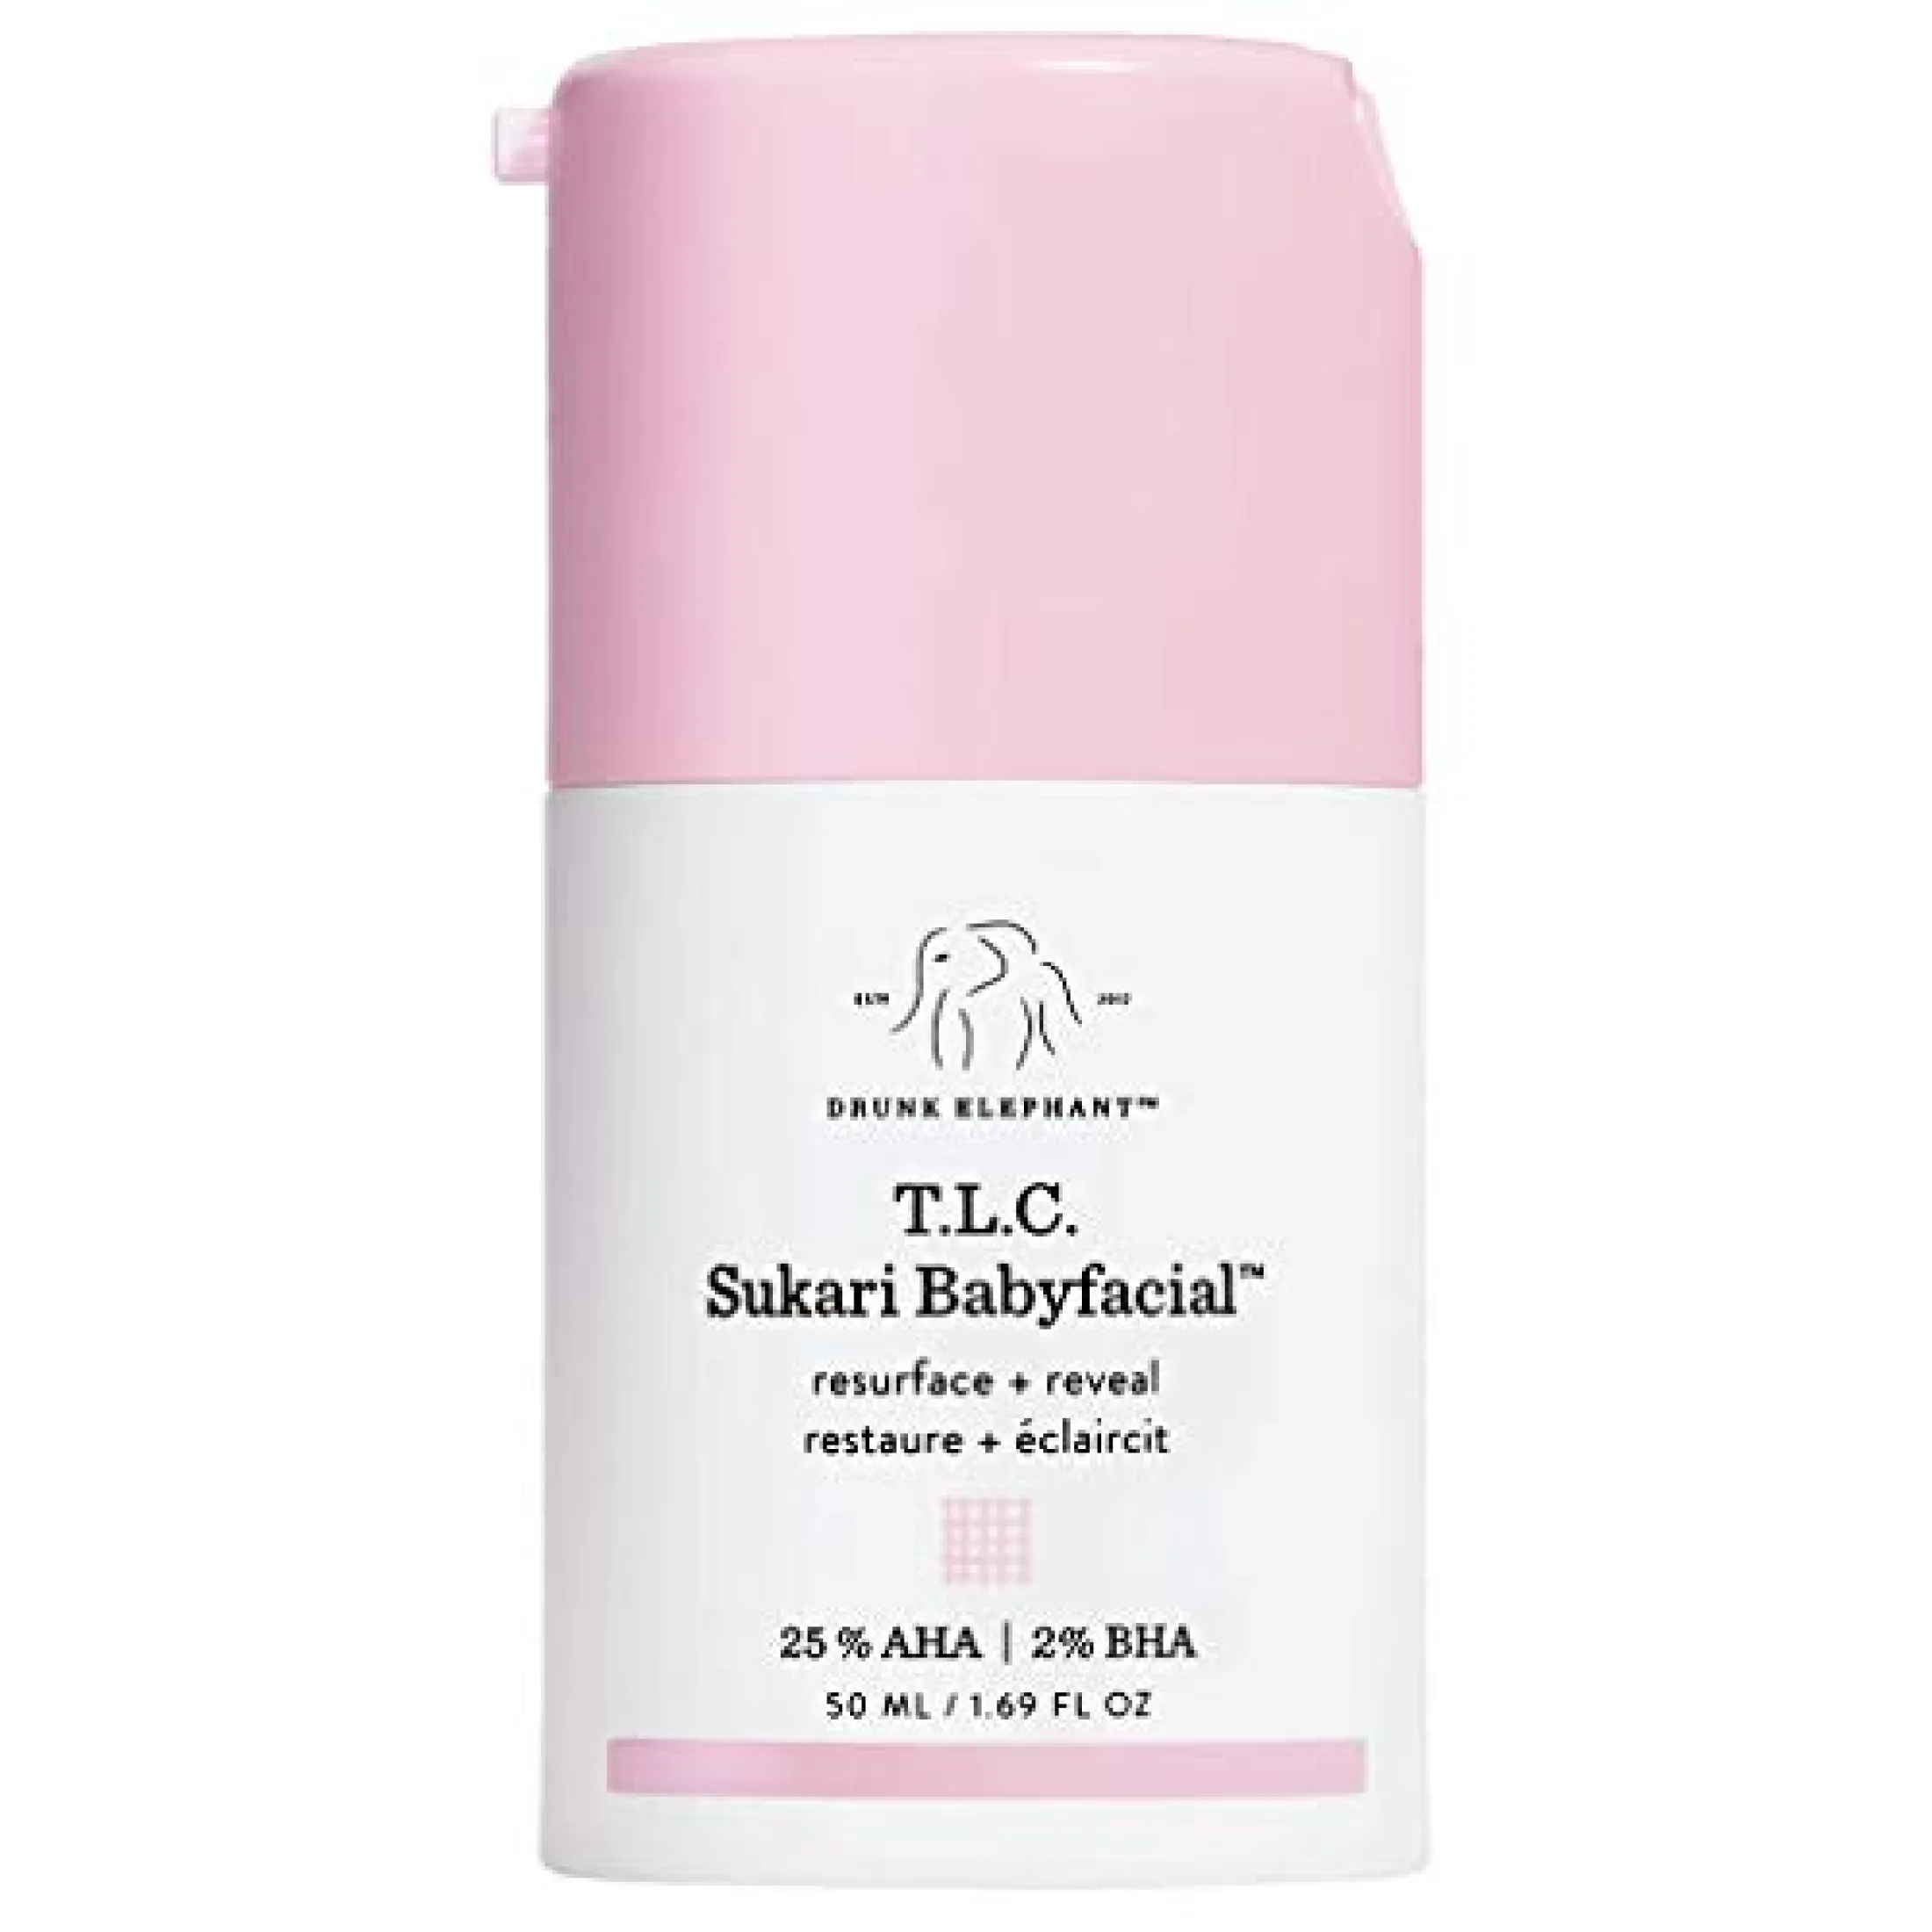 Drunk Elephant T L C Sukari Babyfacial Aha Bha Face Mask For Great Skin Clarity Texture And Tone For A Youthful Radiance 1 69 Fl Oz Lazada Singapore